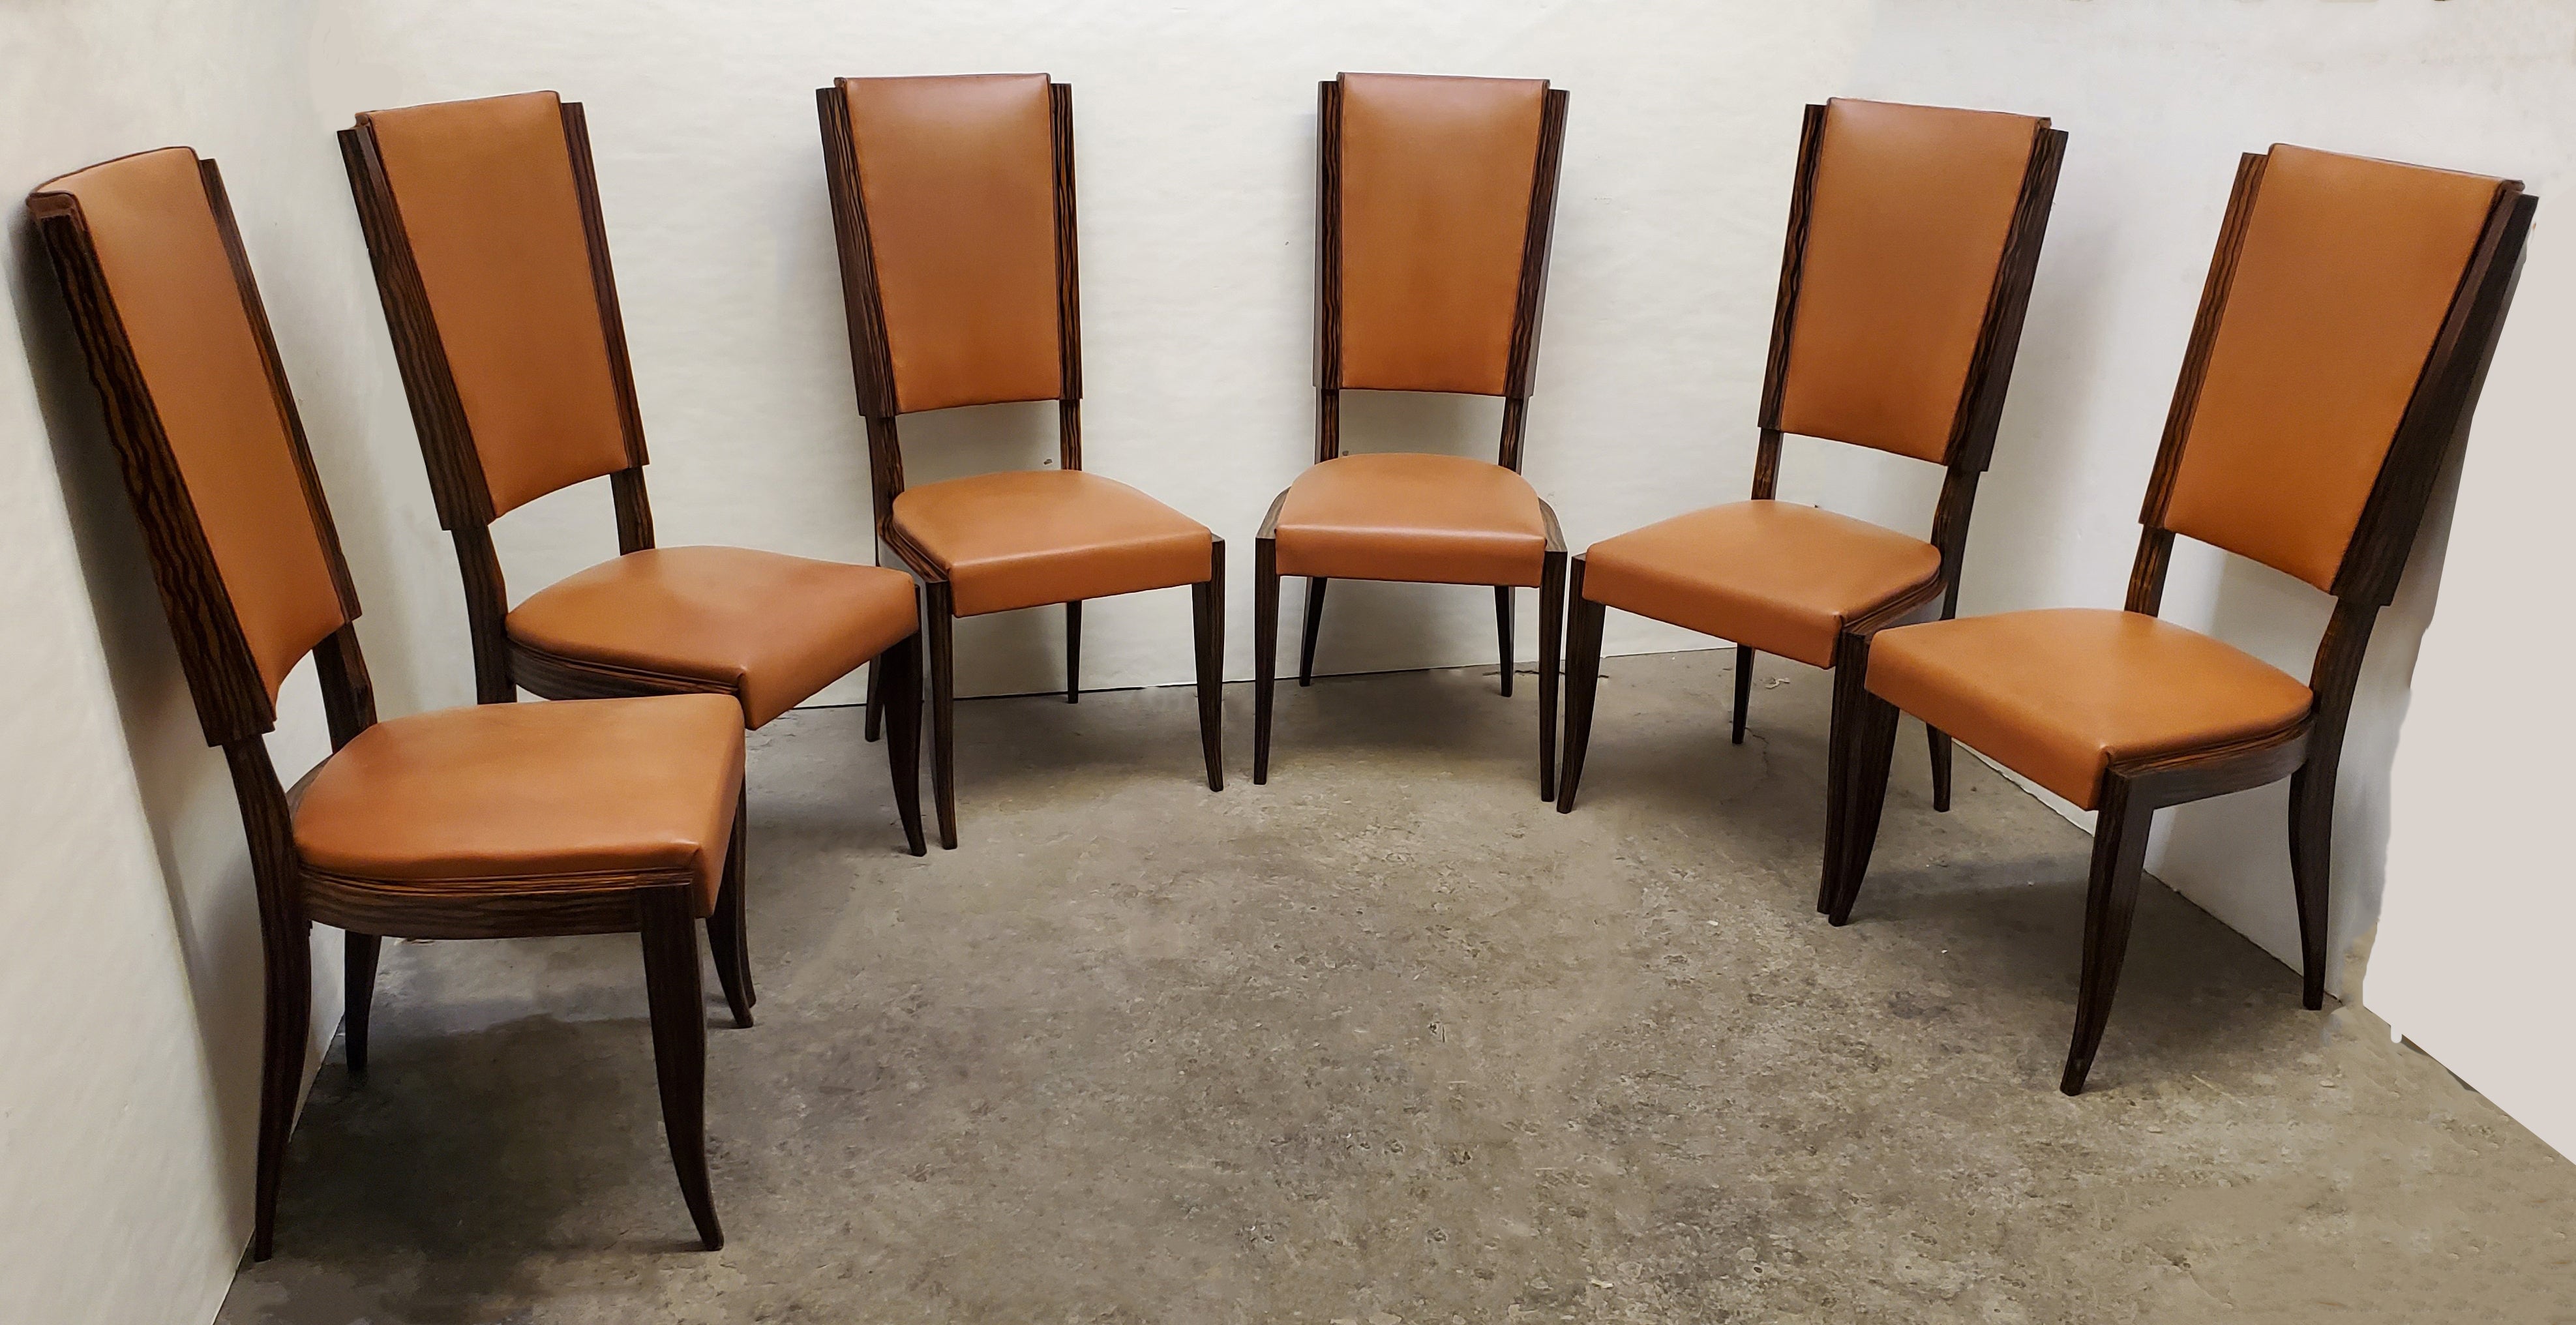 Set of Six Original French Art Deco Faux Macassar Ebony Wood Dining Chairs For Sale 14